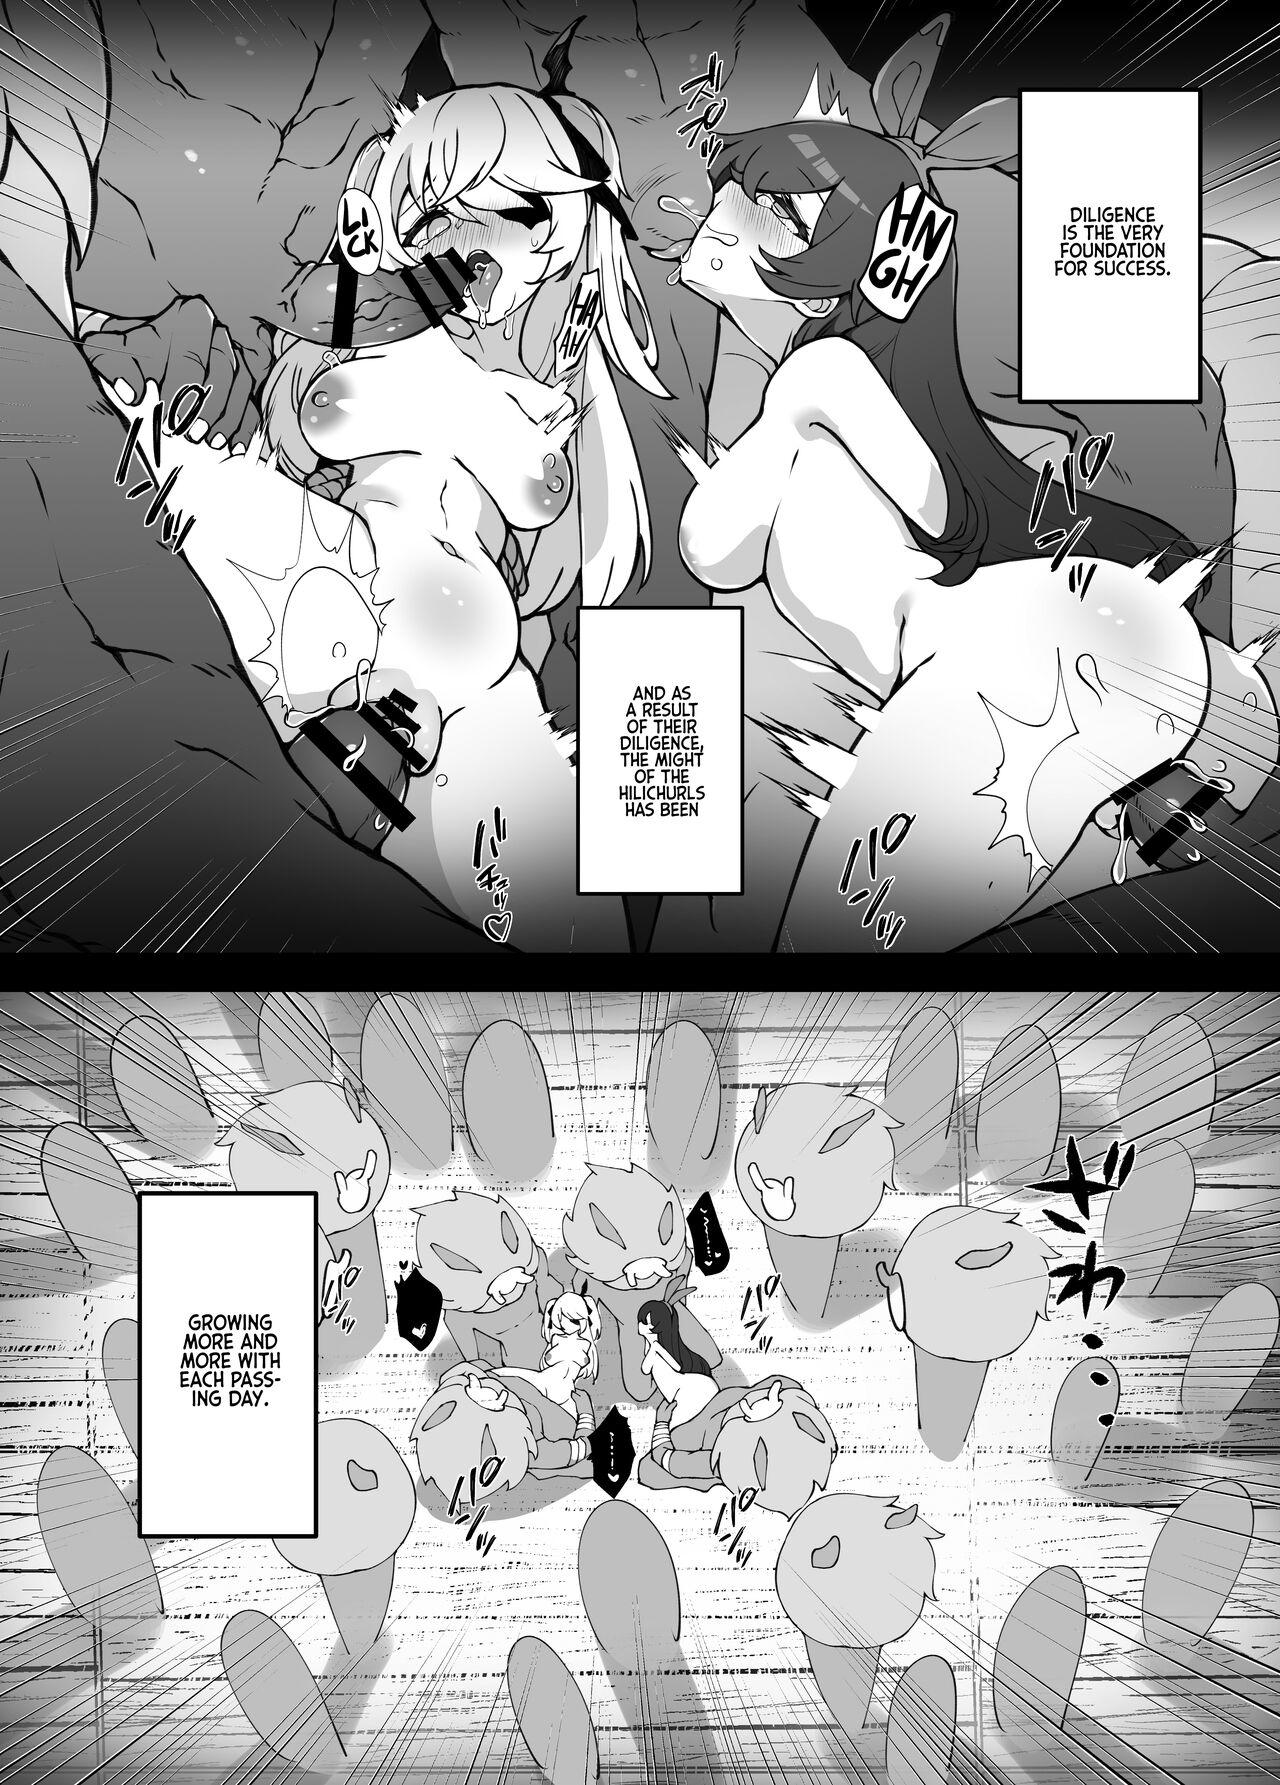 Hotporn [Karouke (Karou)] The Attack of the Hilichurls II ~The Invasion's Prelude~ Noelle,Chivalric Blossom that withered~ (Genshin Impact) [English] [Kyuume] [Digital] - Genshin impact Spy - Page 5